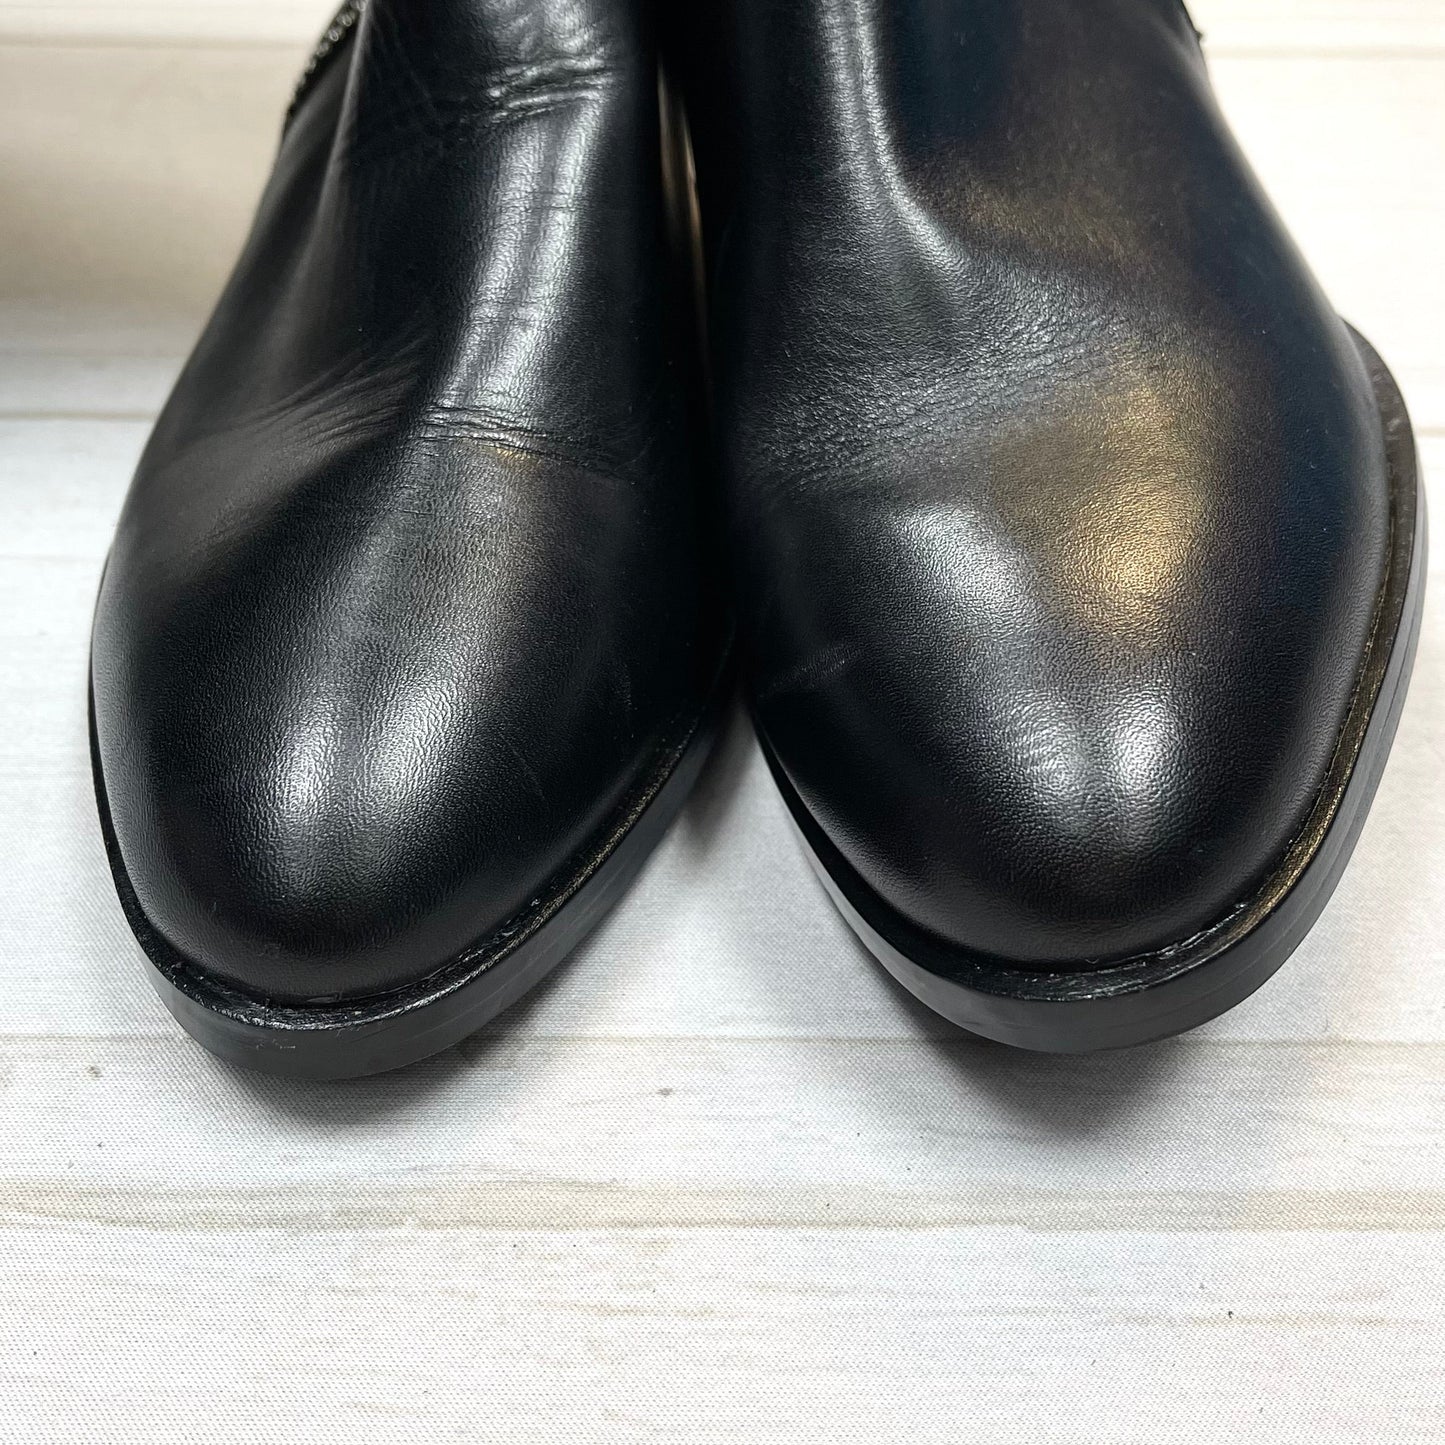 Boots Knee Flats By Dkny  Size: 6.5